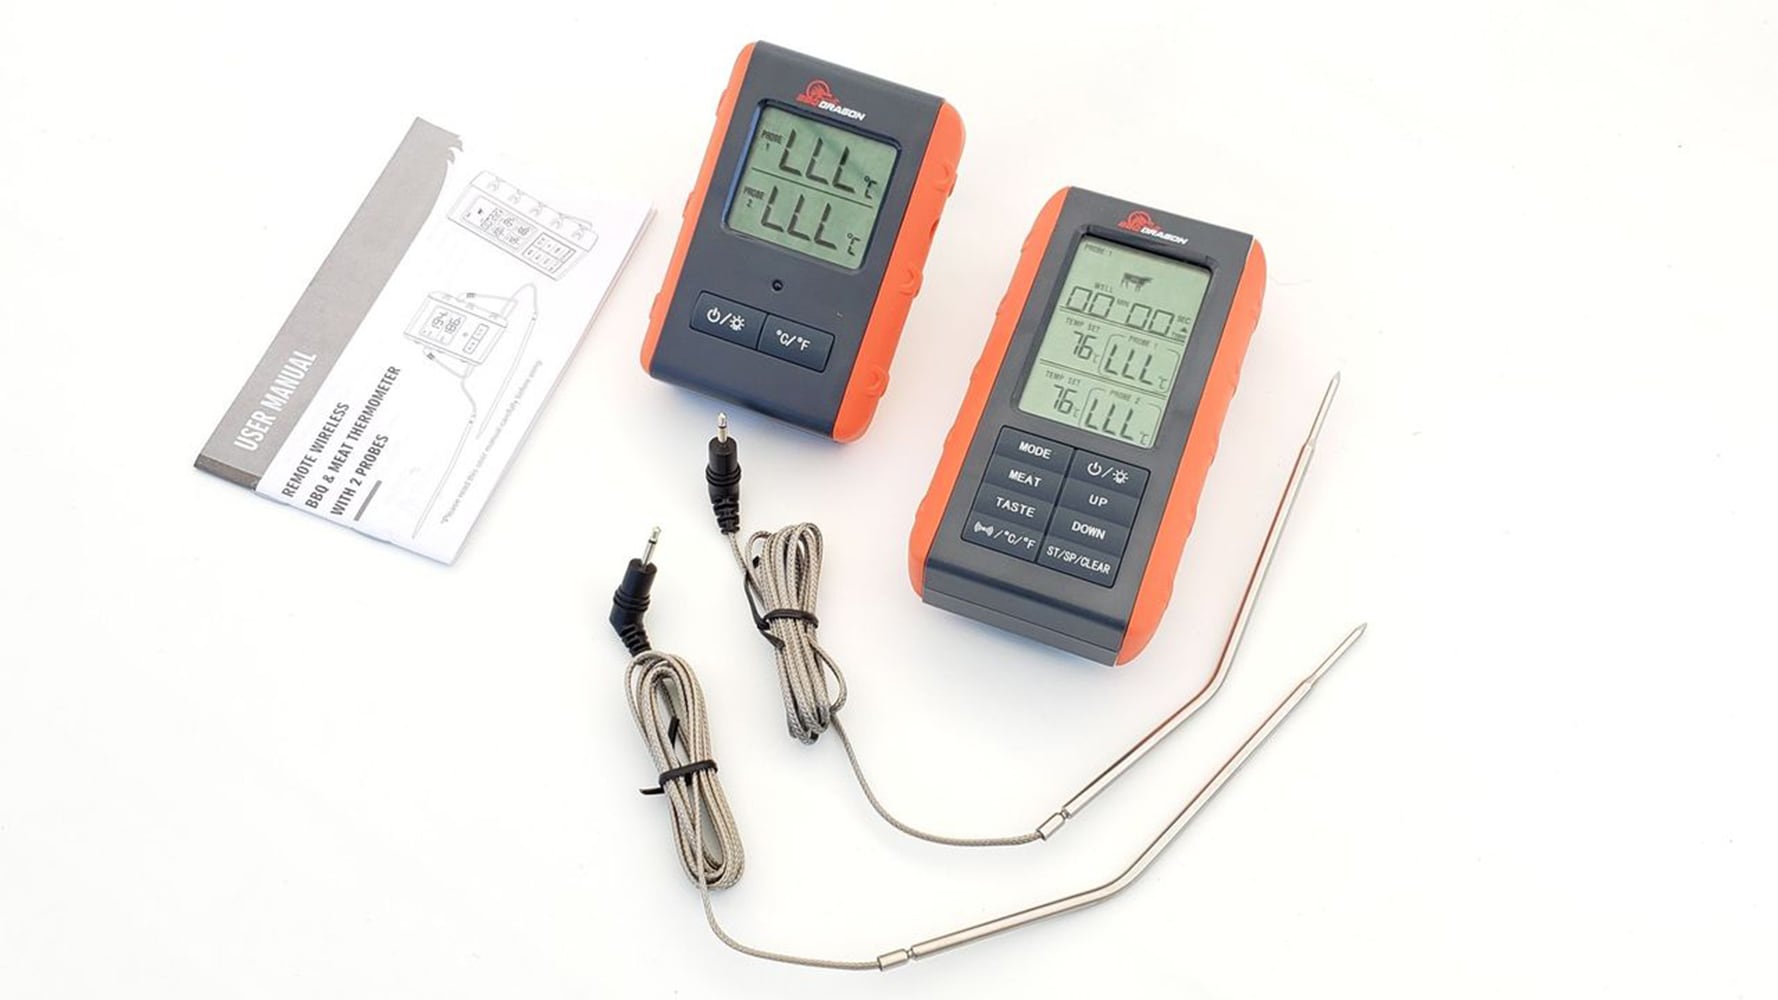 New Enzoo Extended (500 Feet) Range Wireless BBQ Meat Thermometer With 4  Probes